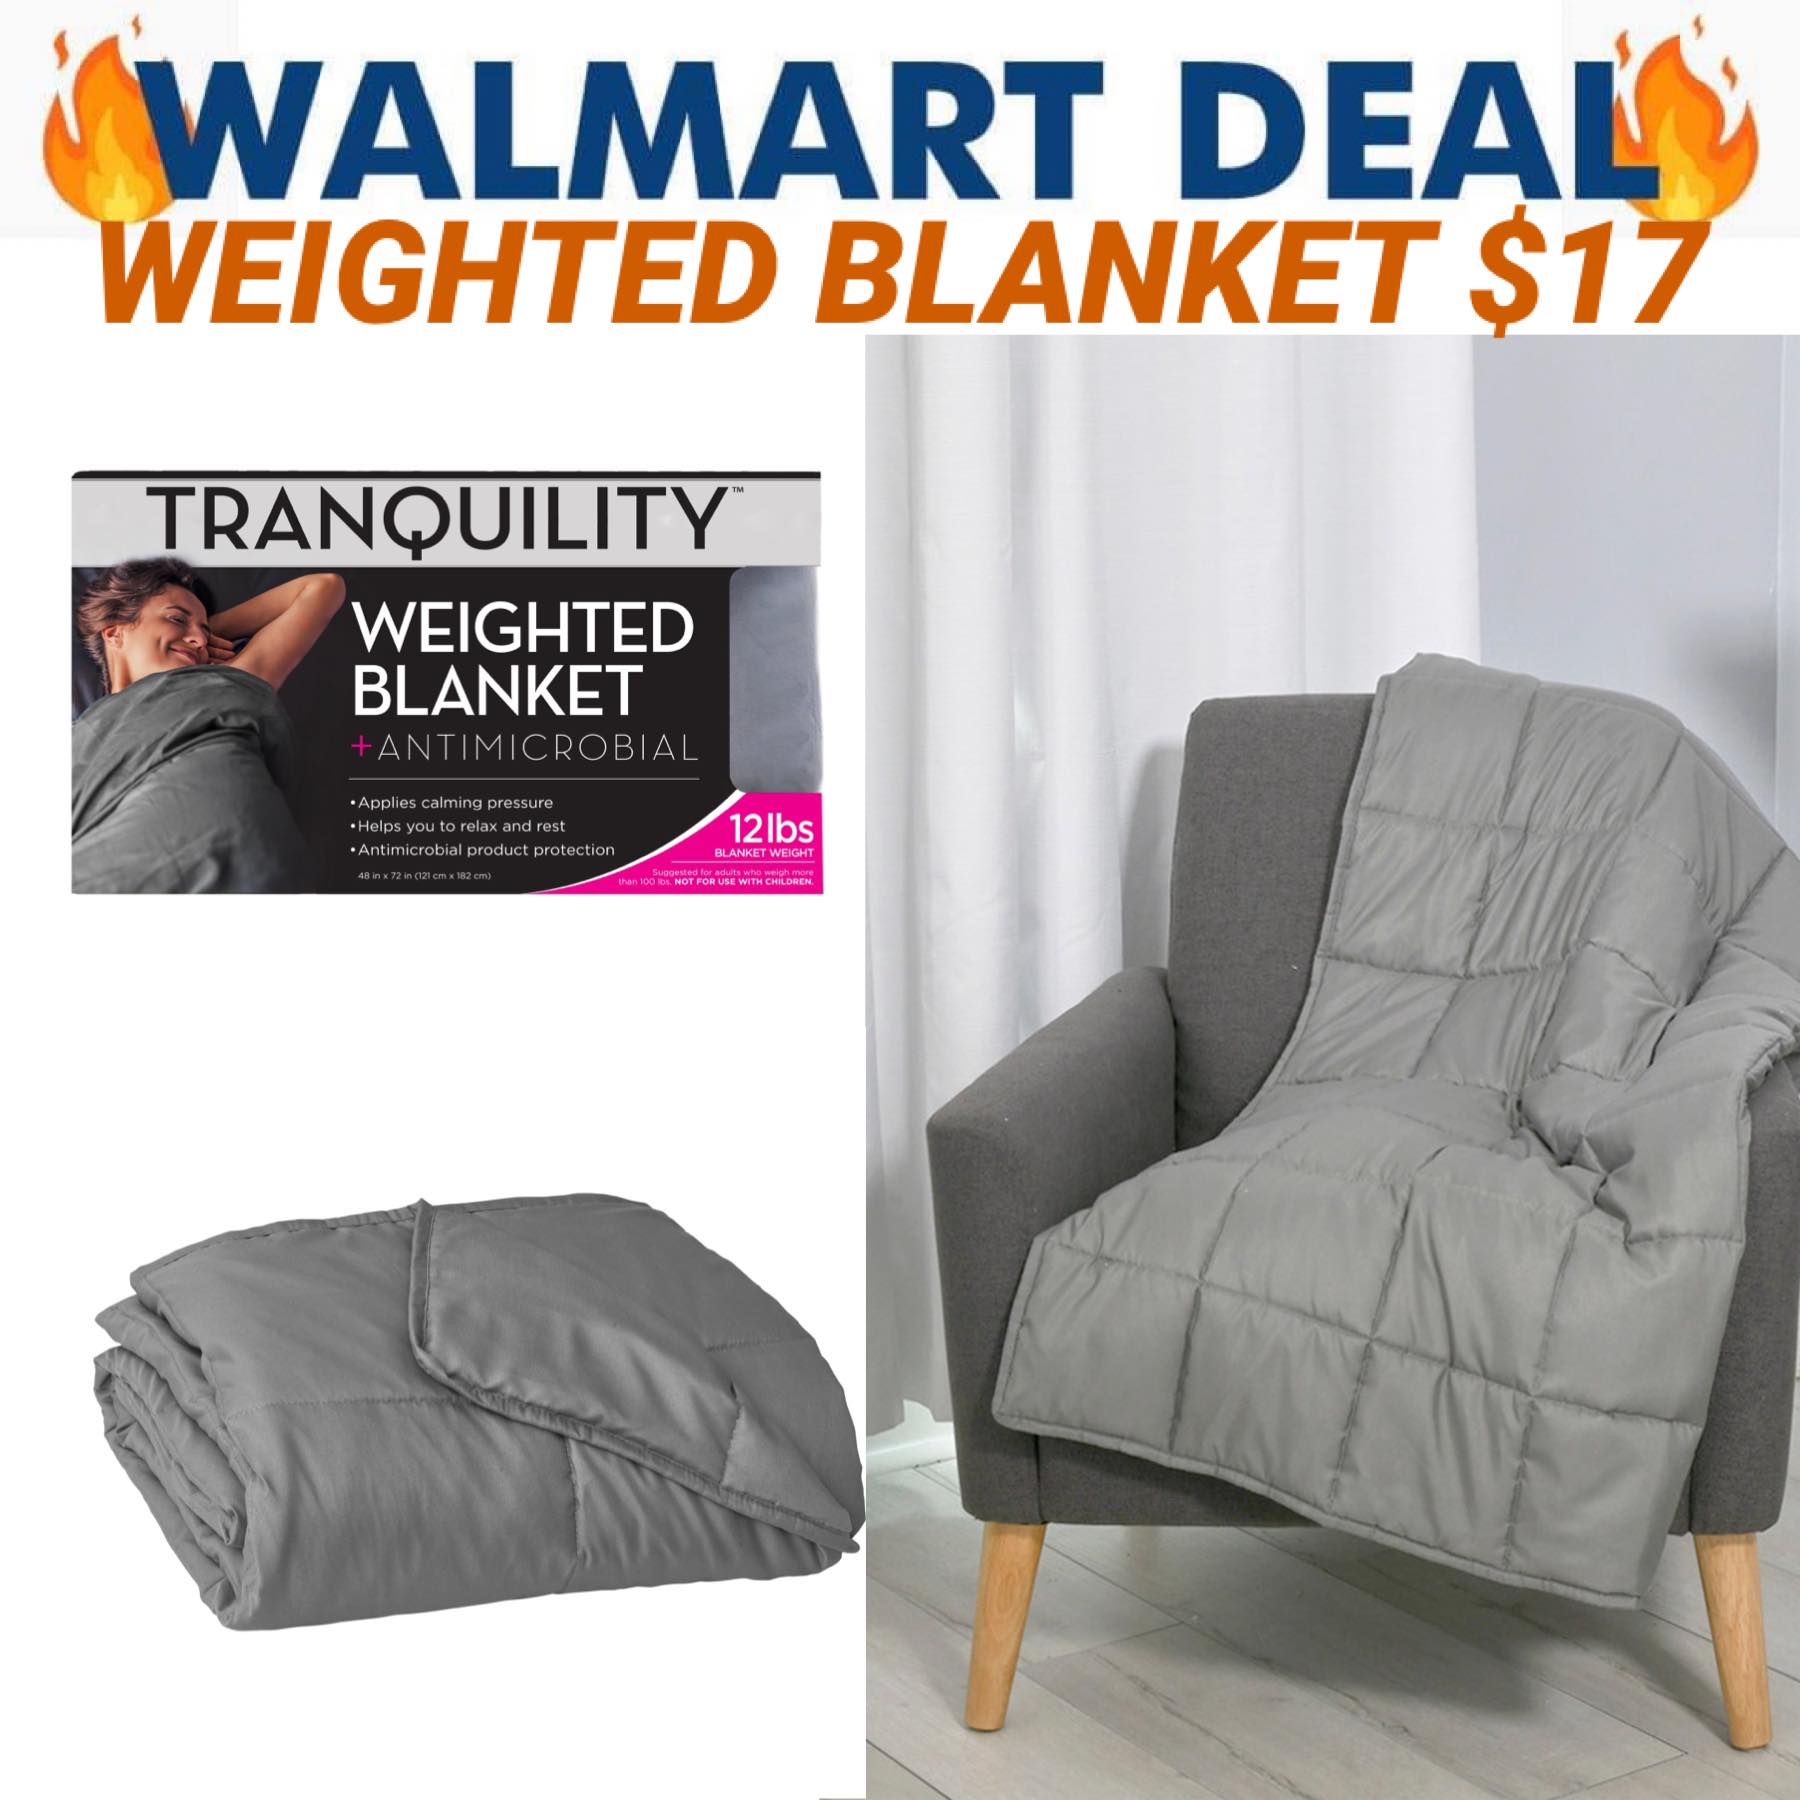 WLAMART - 12 LB WEIGHTED BLANKET $17 - The Freebie Guy